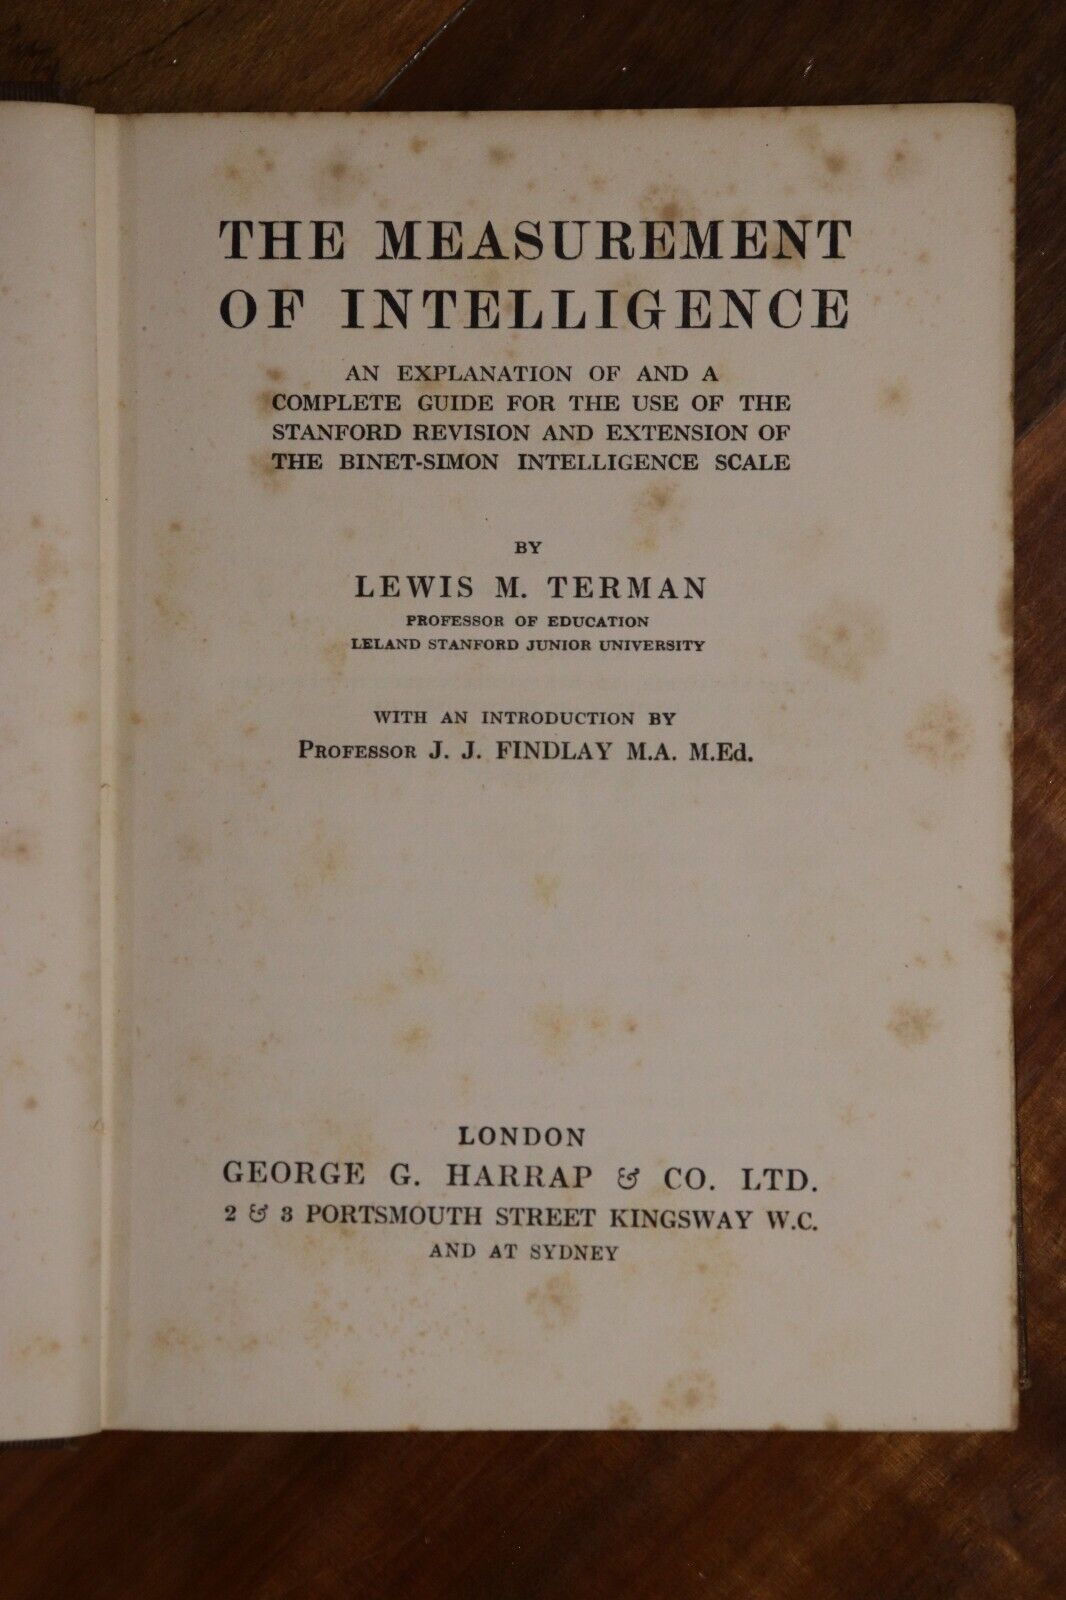 The Measurement Of Intelligence by LM Terman - 1921 - Antique Psychology Book - 0